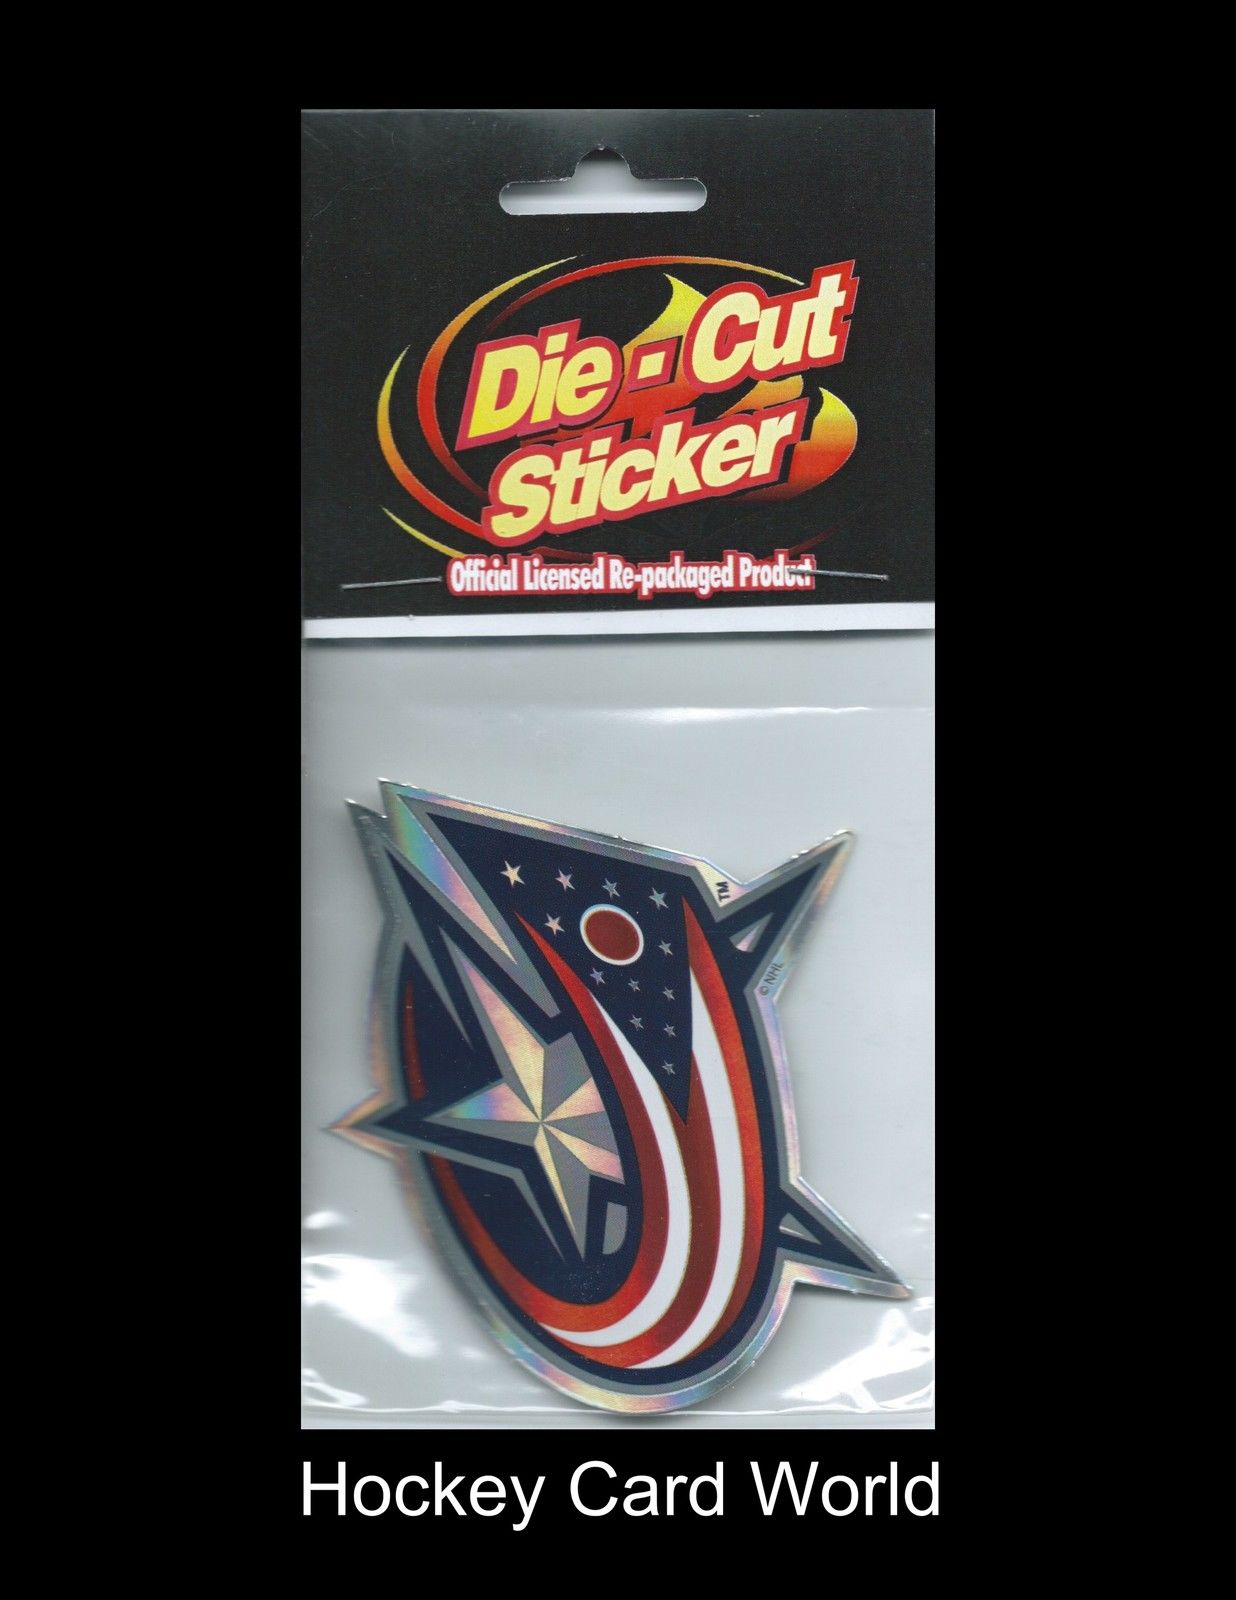  Columbus Blue Jackets NHL Official Licensed Die-Cut Sticker Decal 3"x3" Image 1